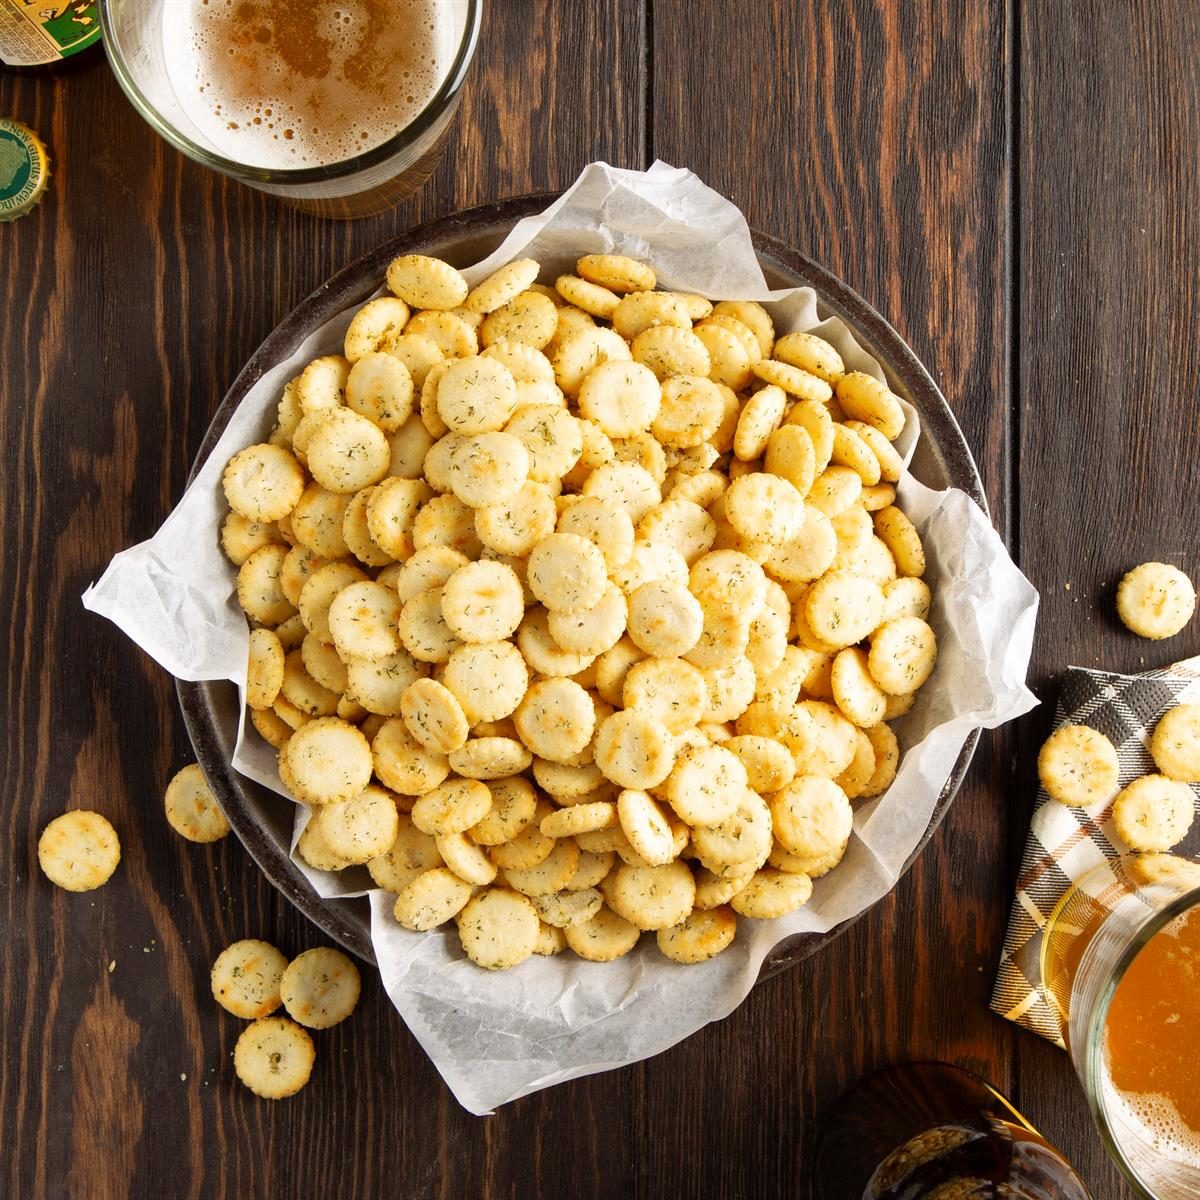 Ranch Oyster Crackers Recipe: How to Make It